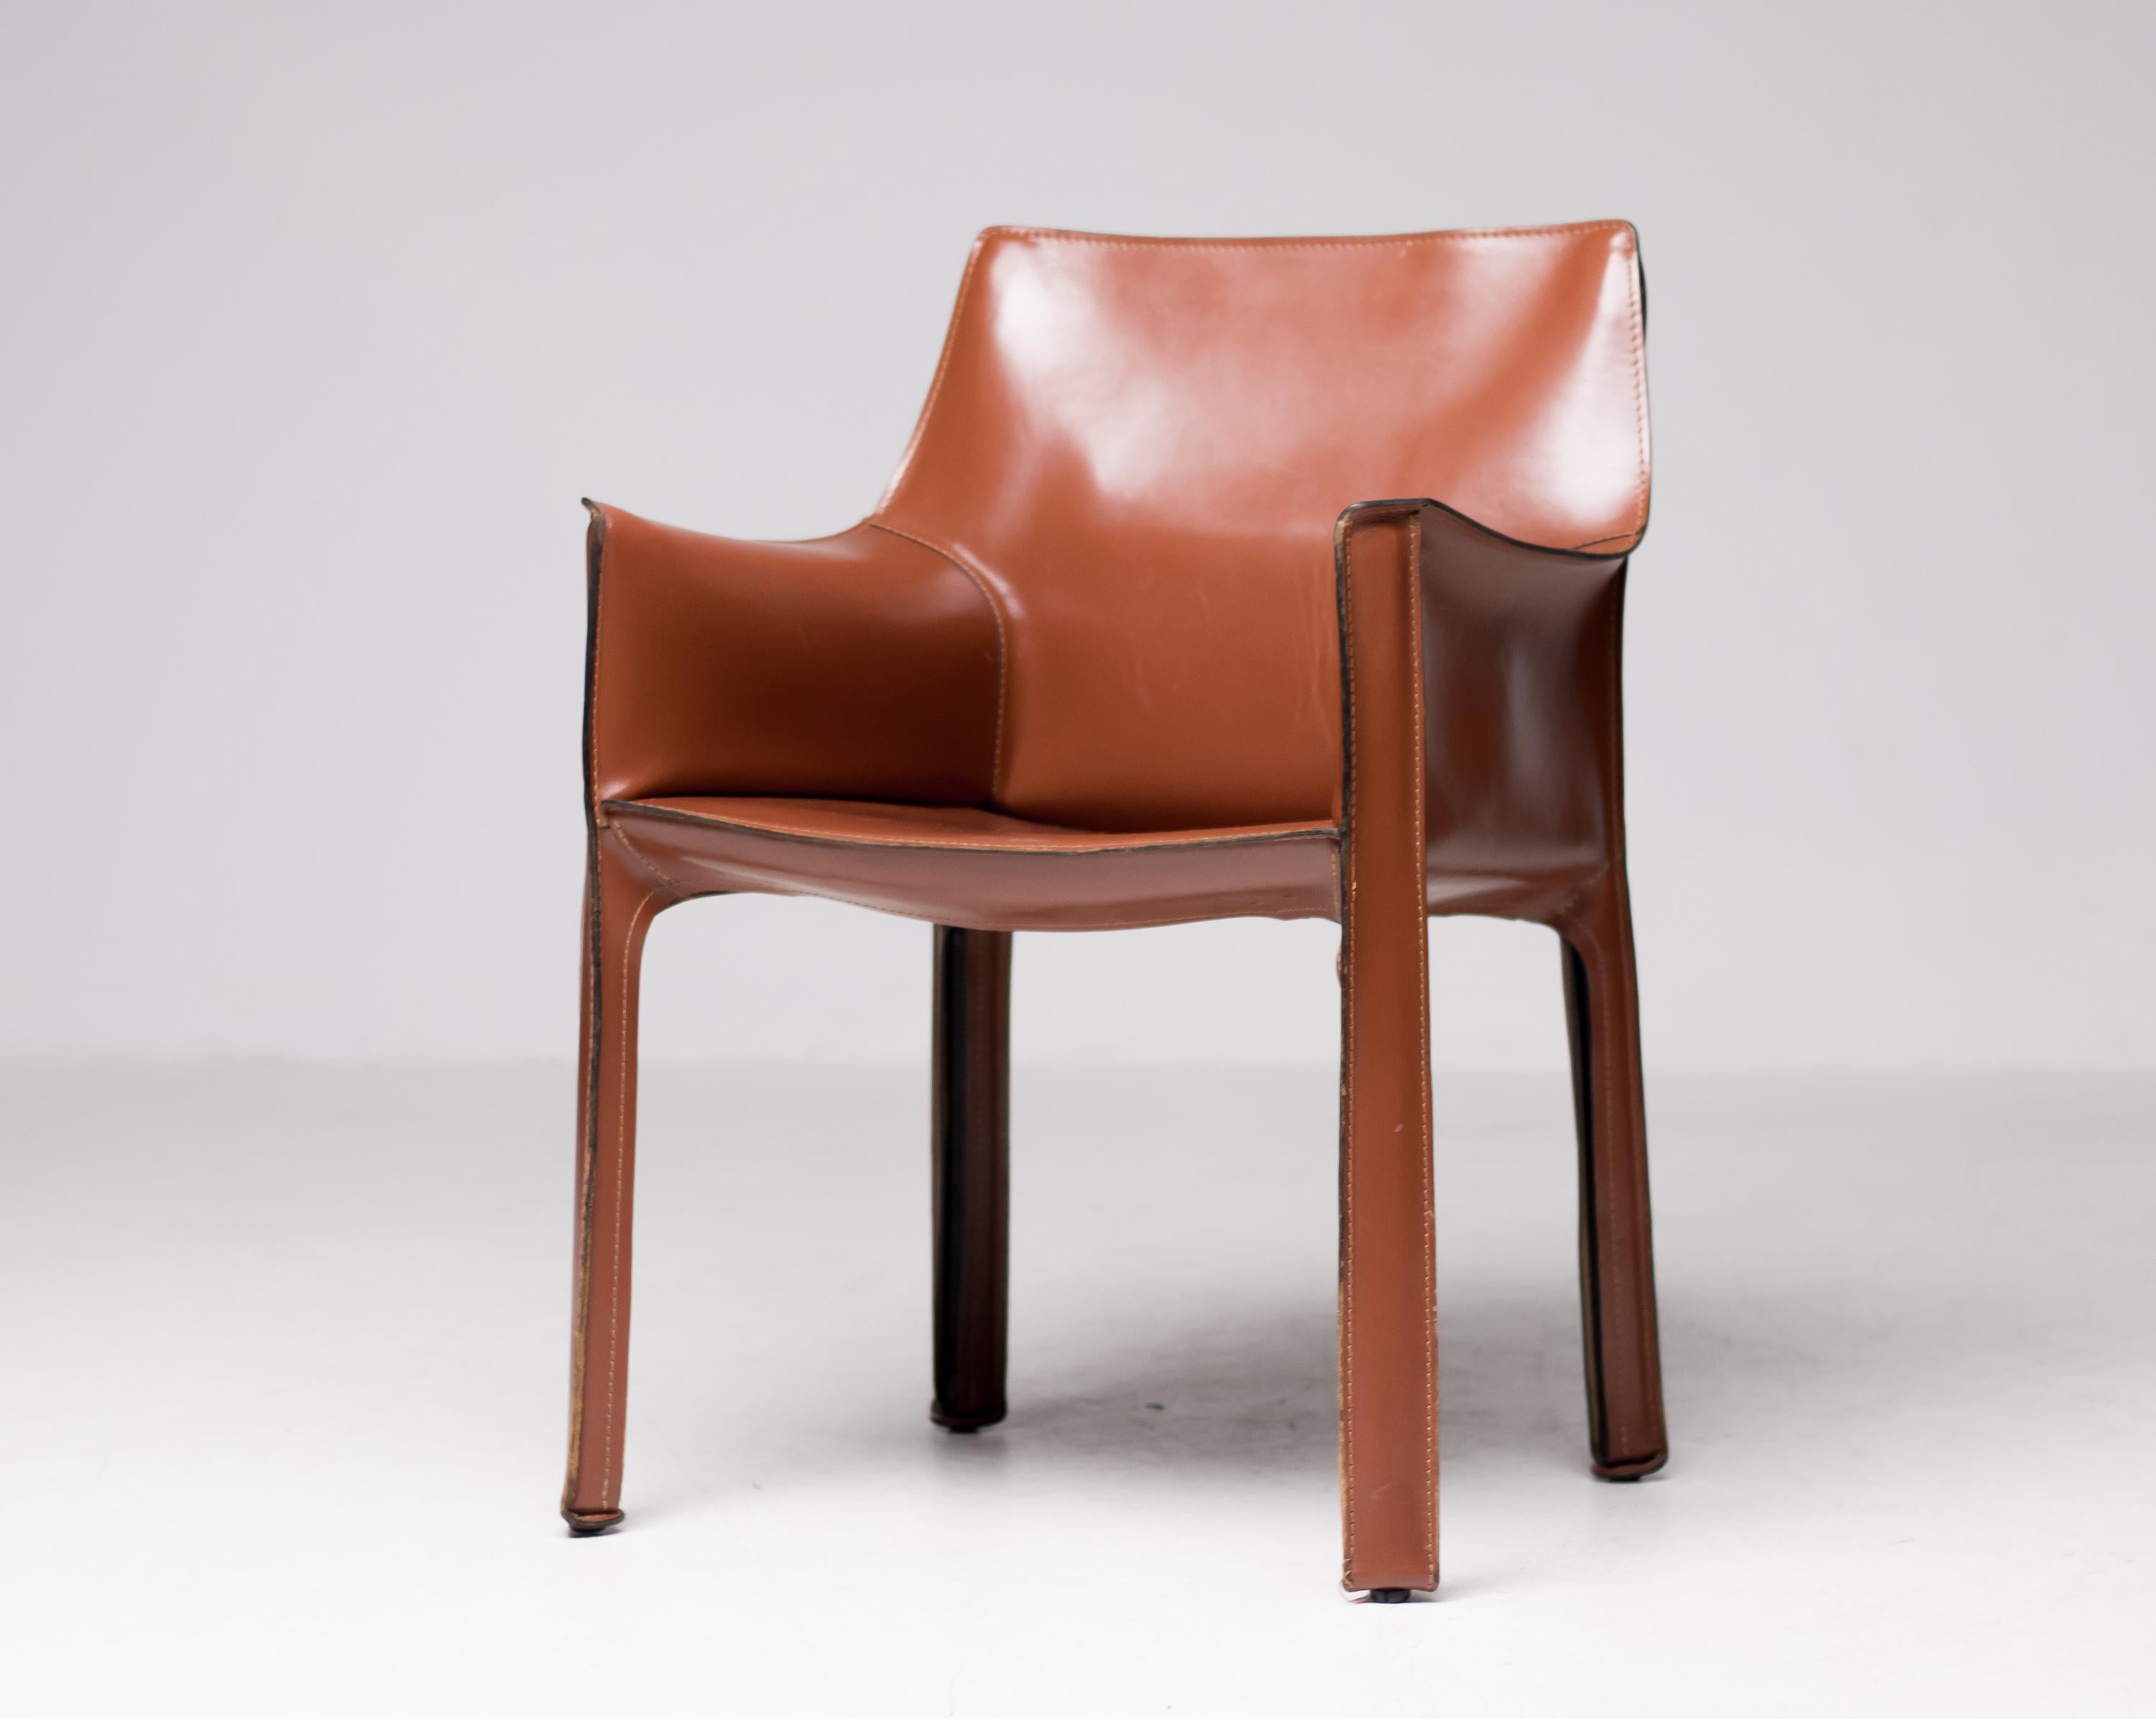 Mario Bellini for Cassina cab chairs in rare cognac Italian leather.
The leather has wonderful patina and is in excellent condition.
Marked Cassina at the bottom.